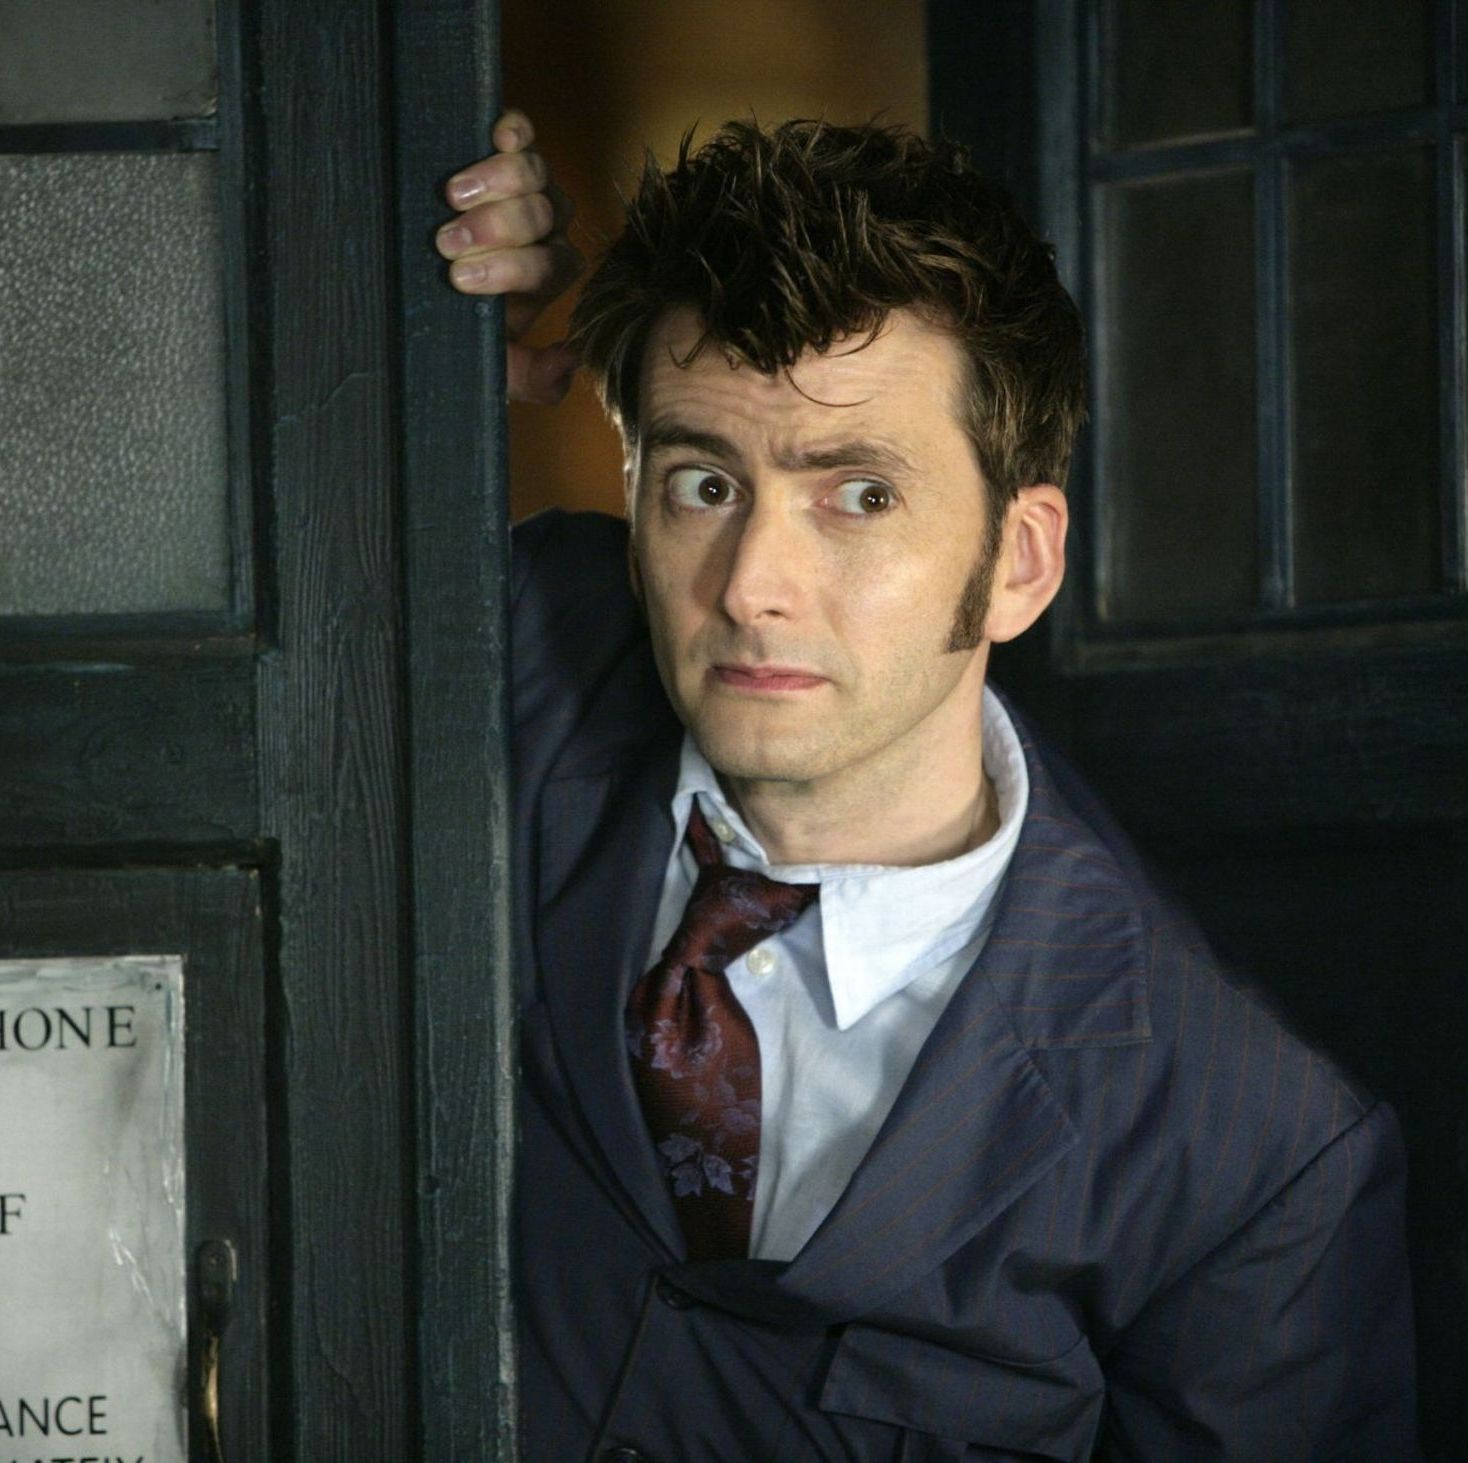 David Tennant says it would be “fun” to return for Doctor Who’s 60th